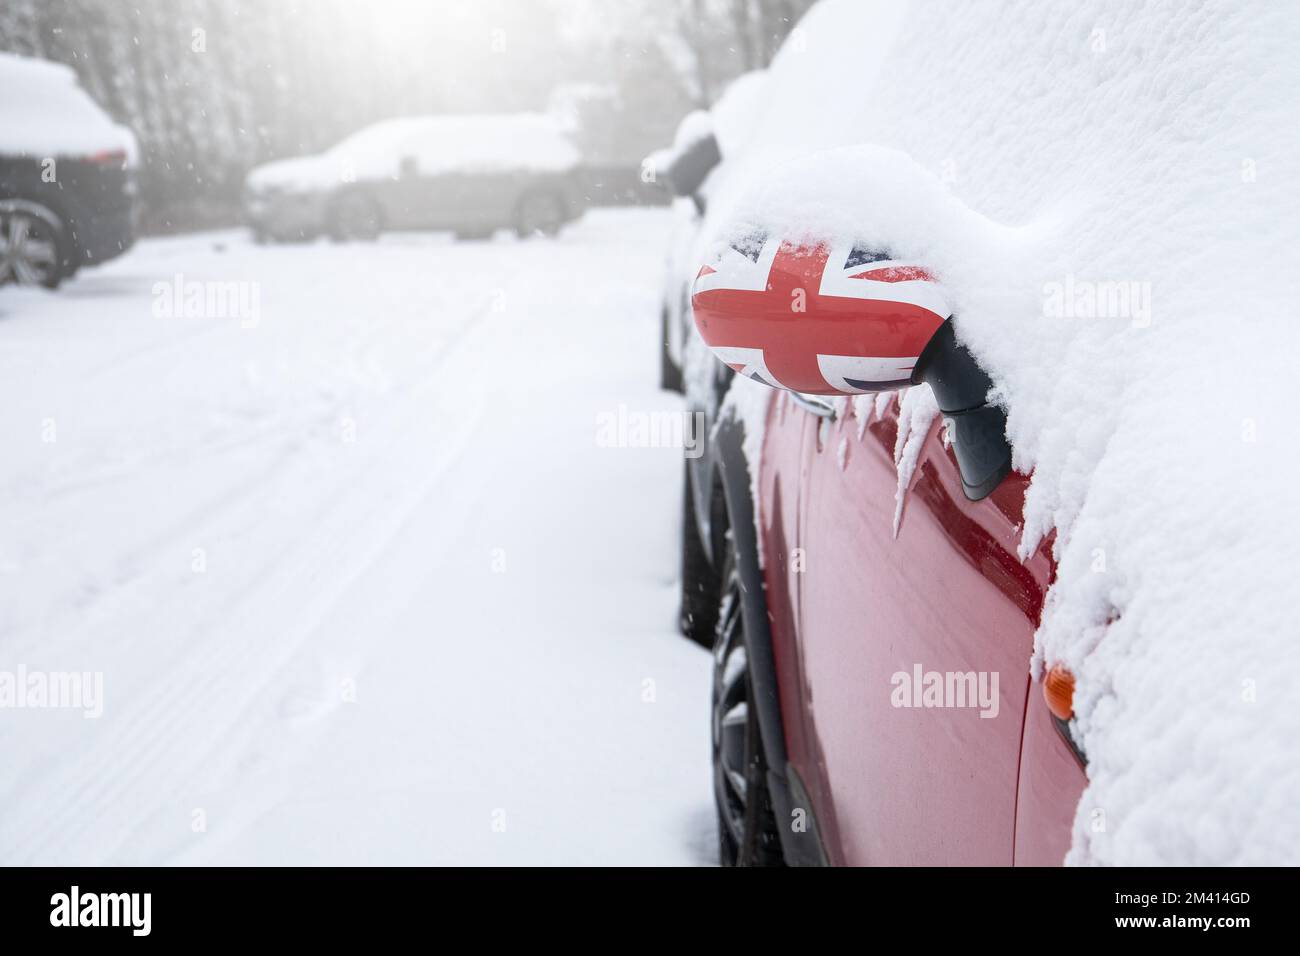 Snowy parking lot. Snowfall and storm. British flag. Stock Photo